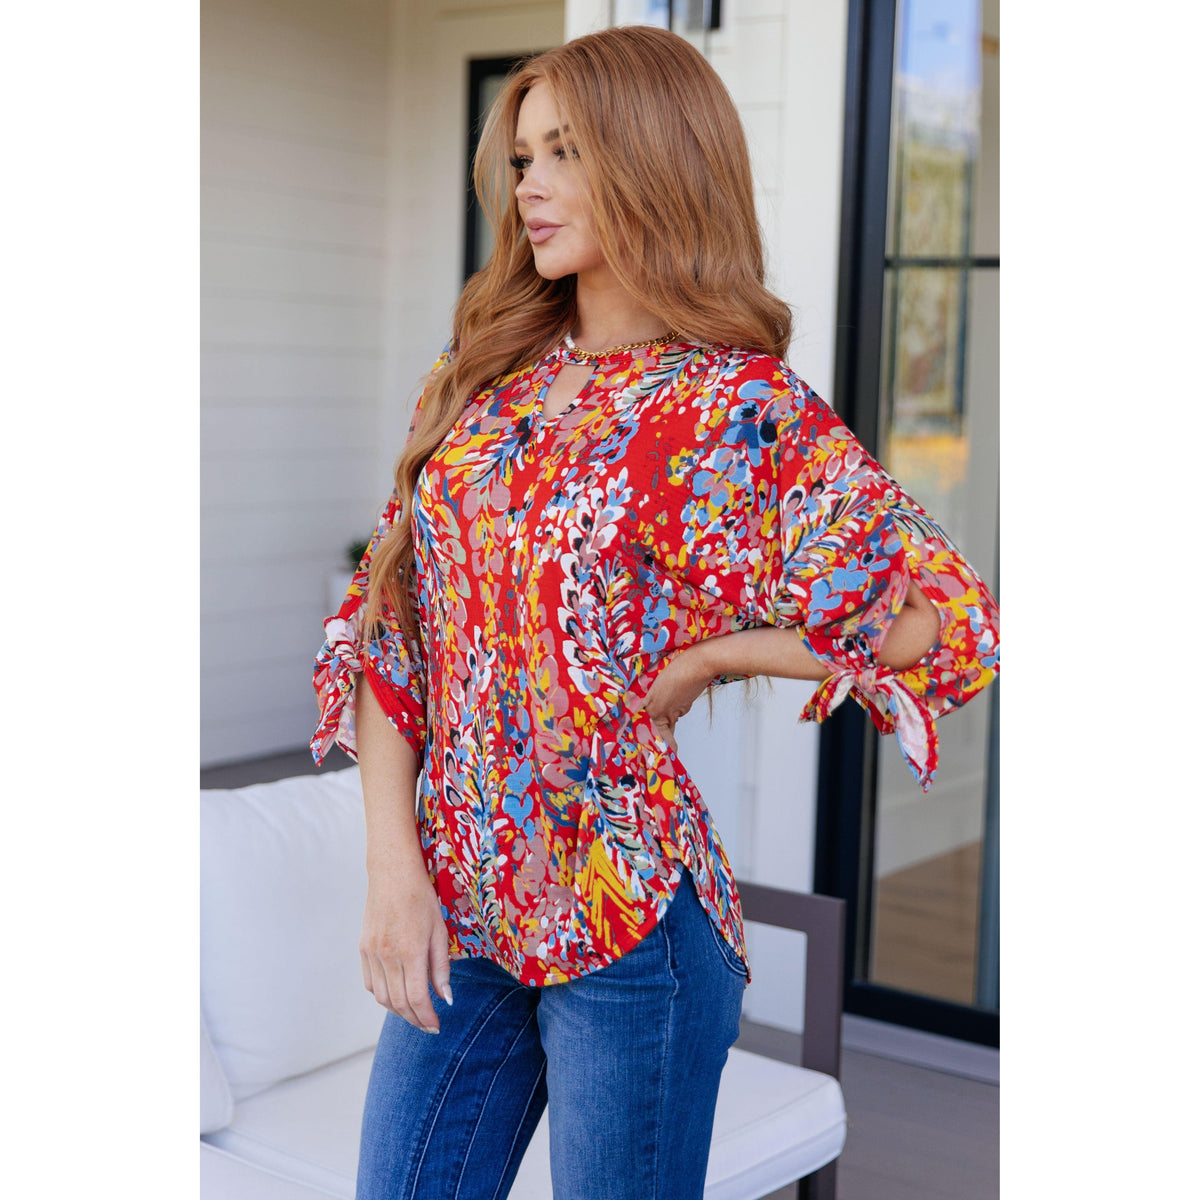 Not So Silly Keyhole Neckline Blouse - becauseofadi